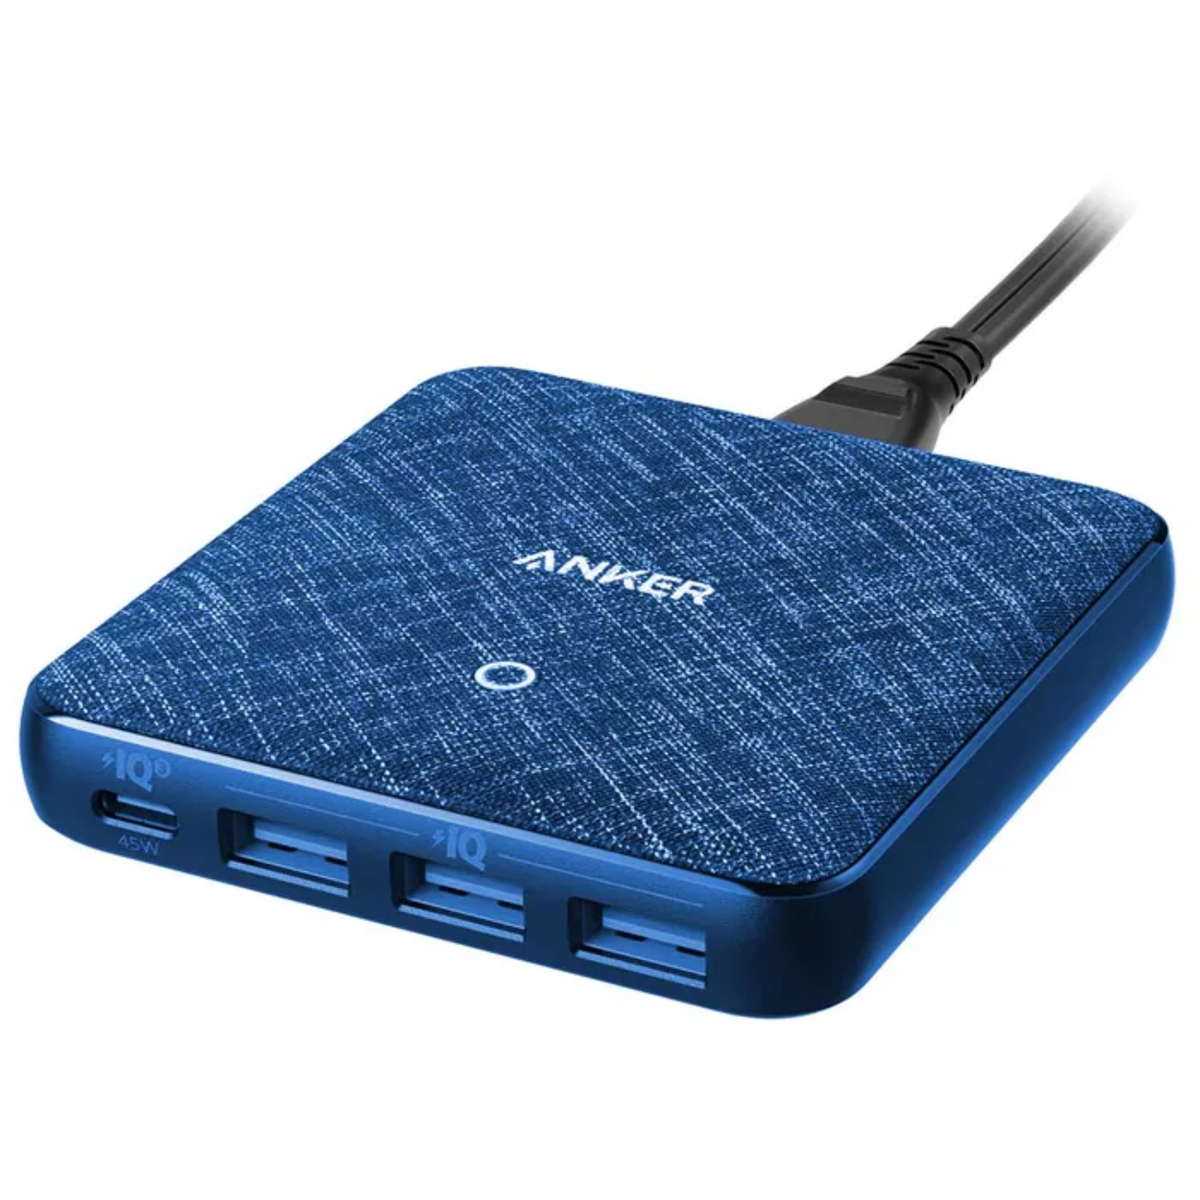 Anker PowerPort Atom III Charger, 4 Ports, Blue, A2045K31